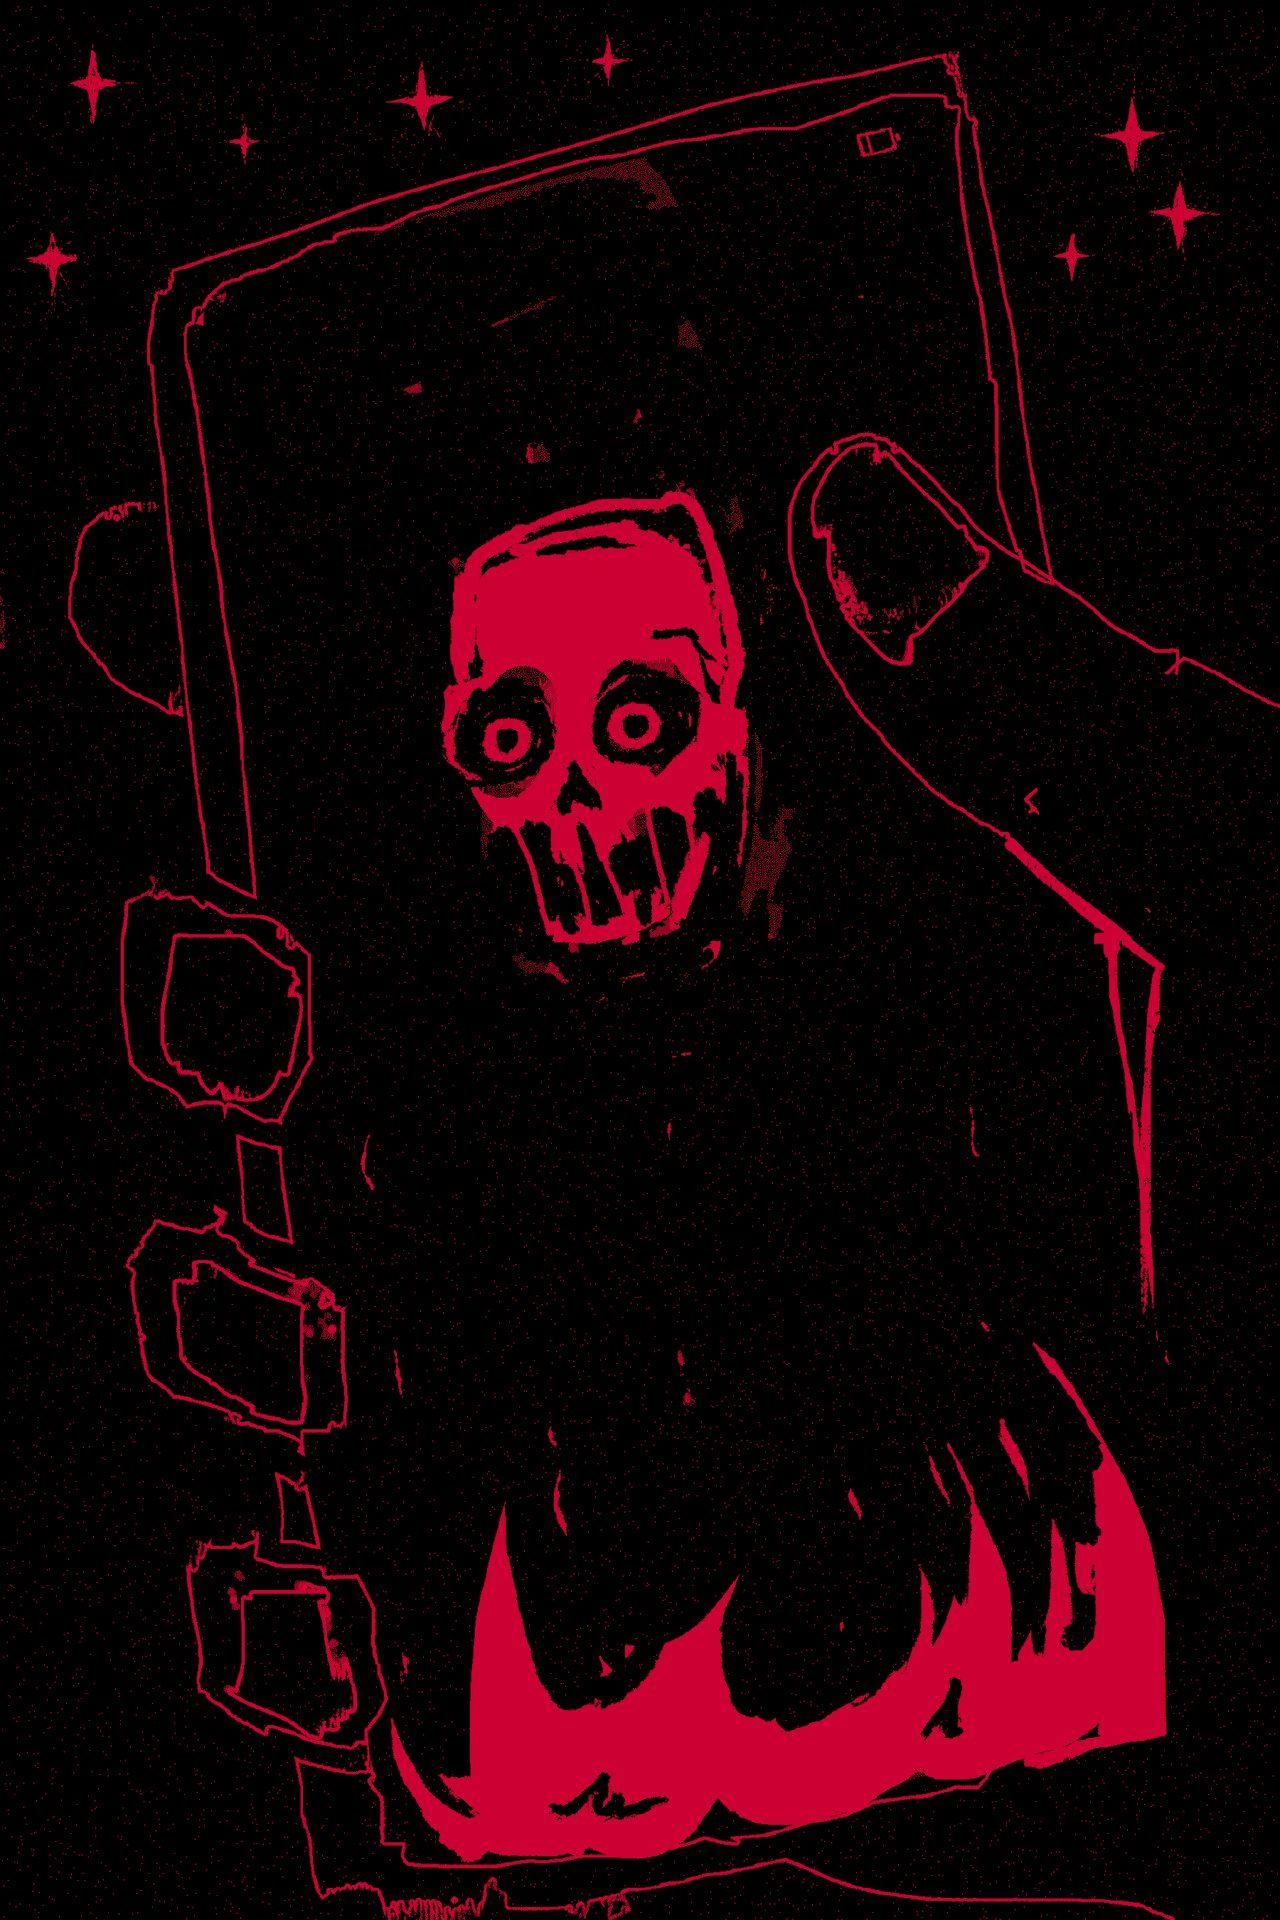 A red and black illustration of a creepy figure holding a knife and a book. - Skeleton